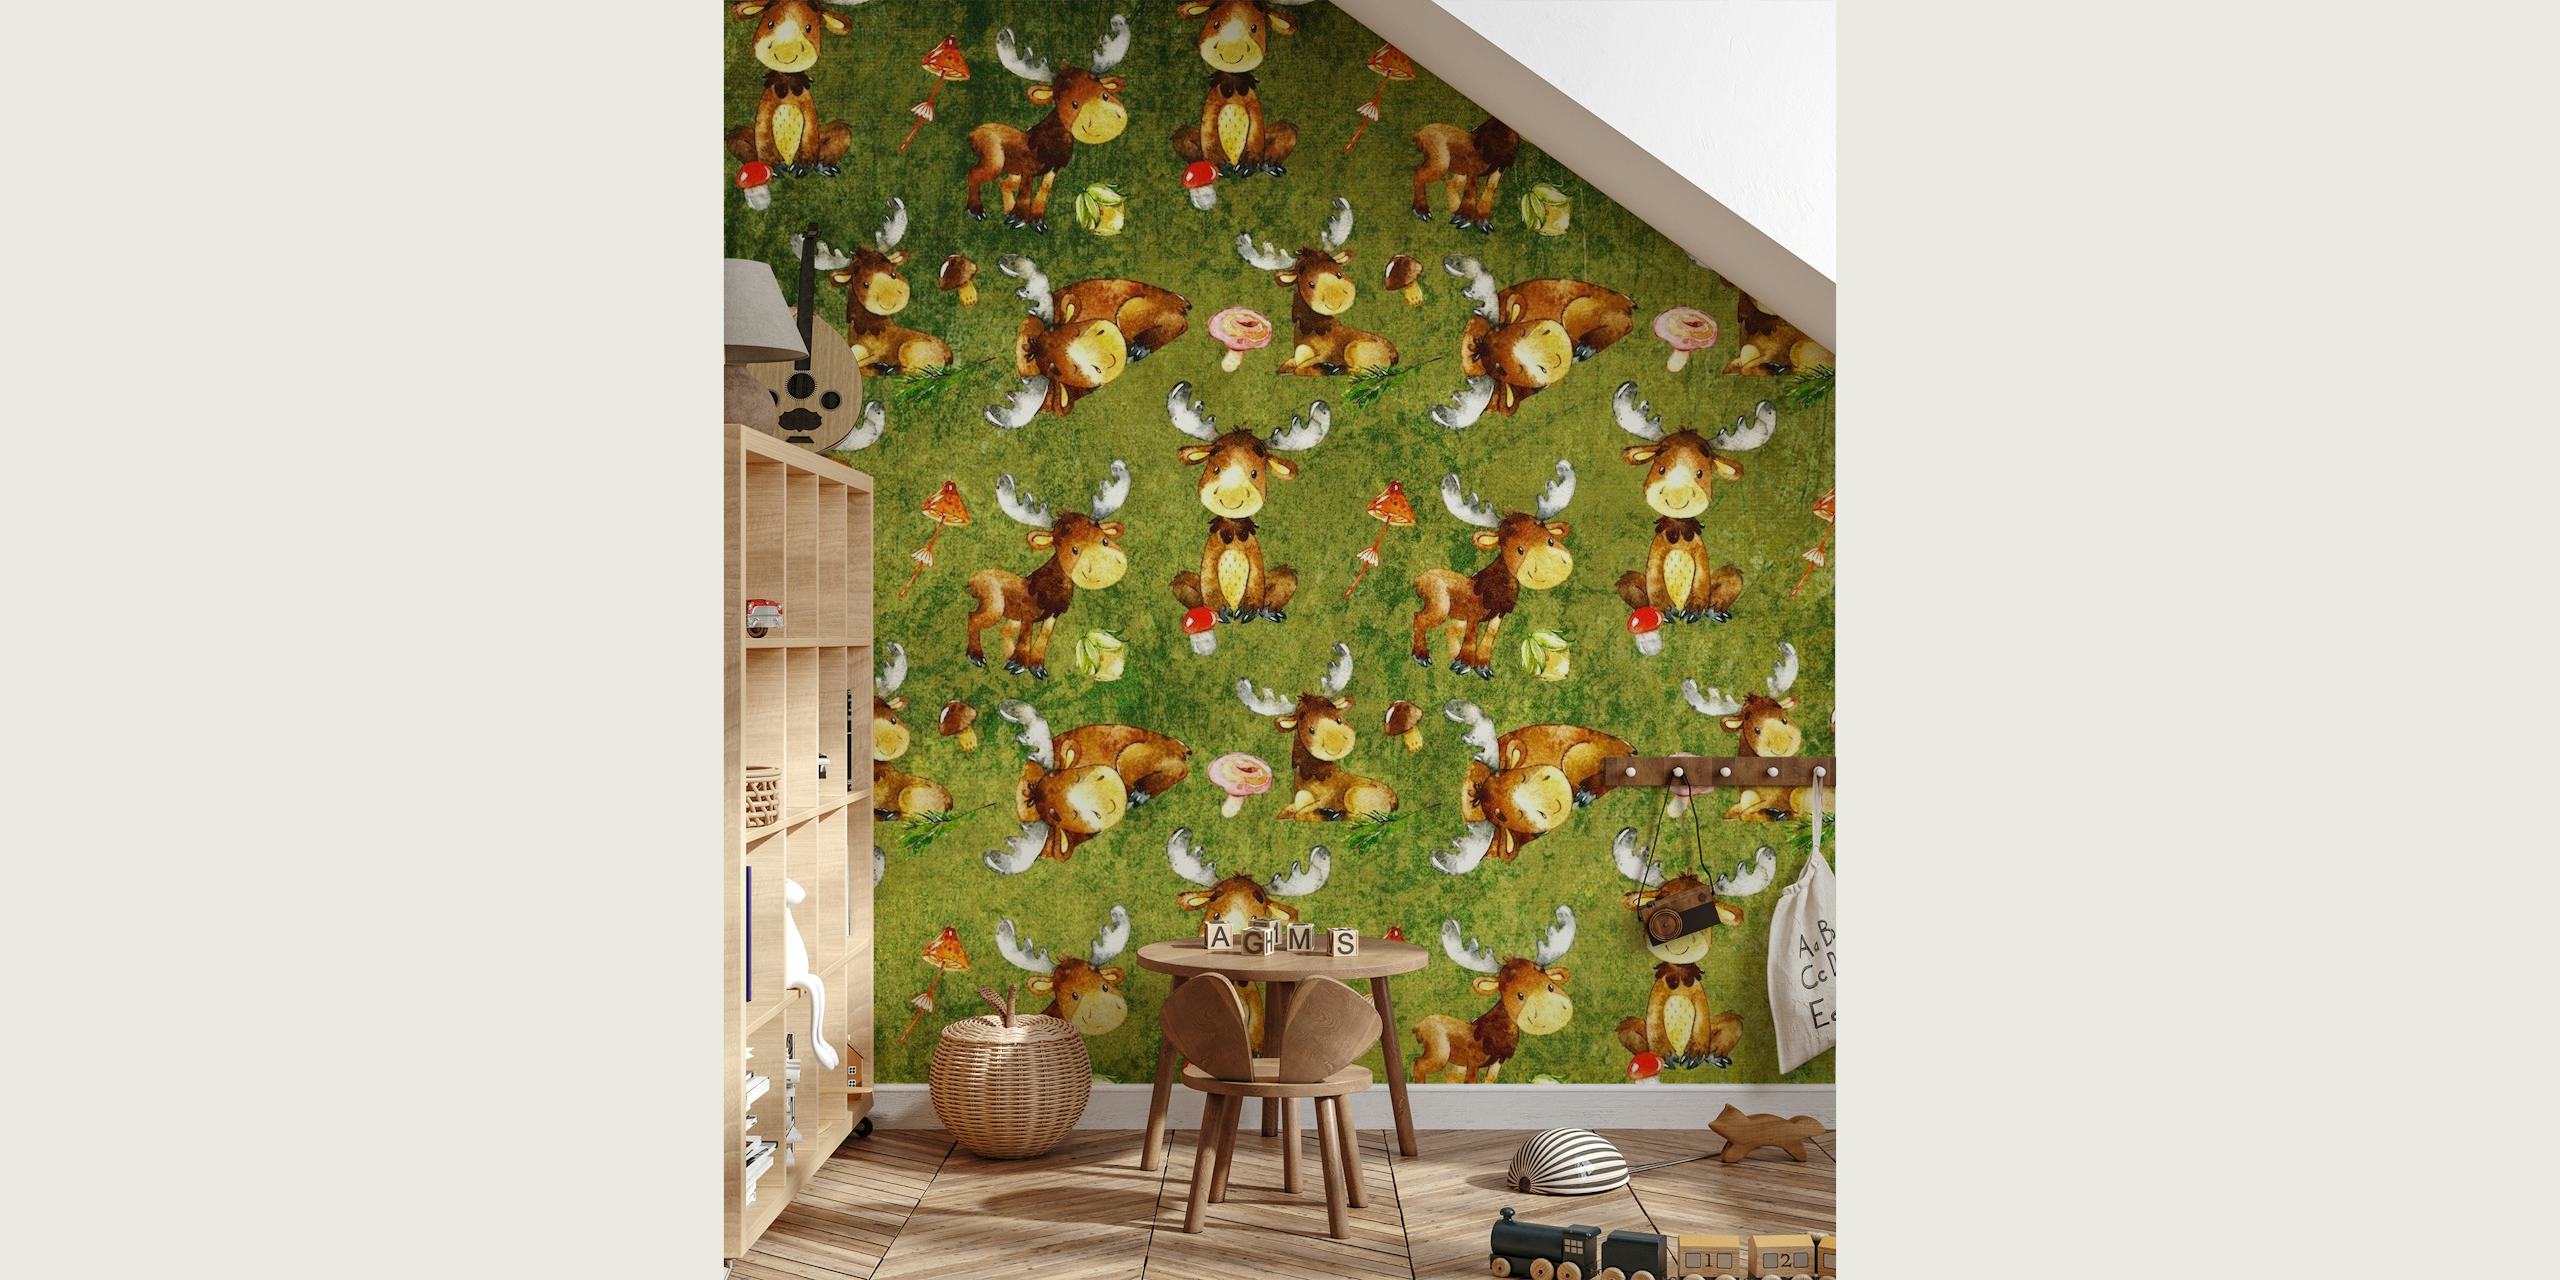 Illustration of happy elks in a forest setting wall mural